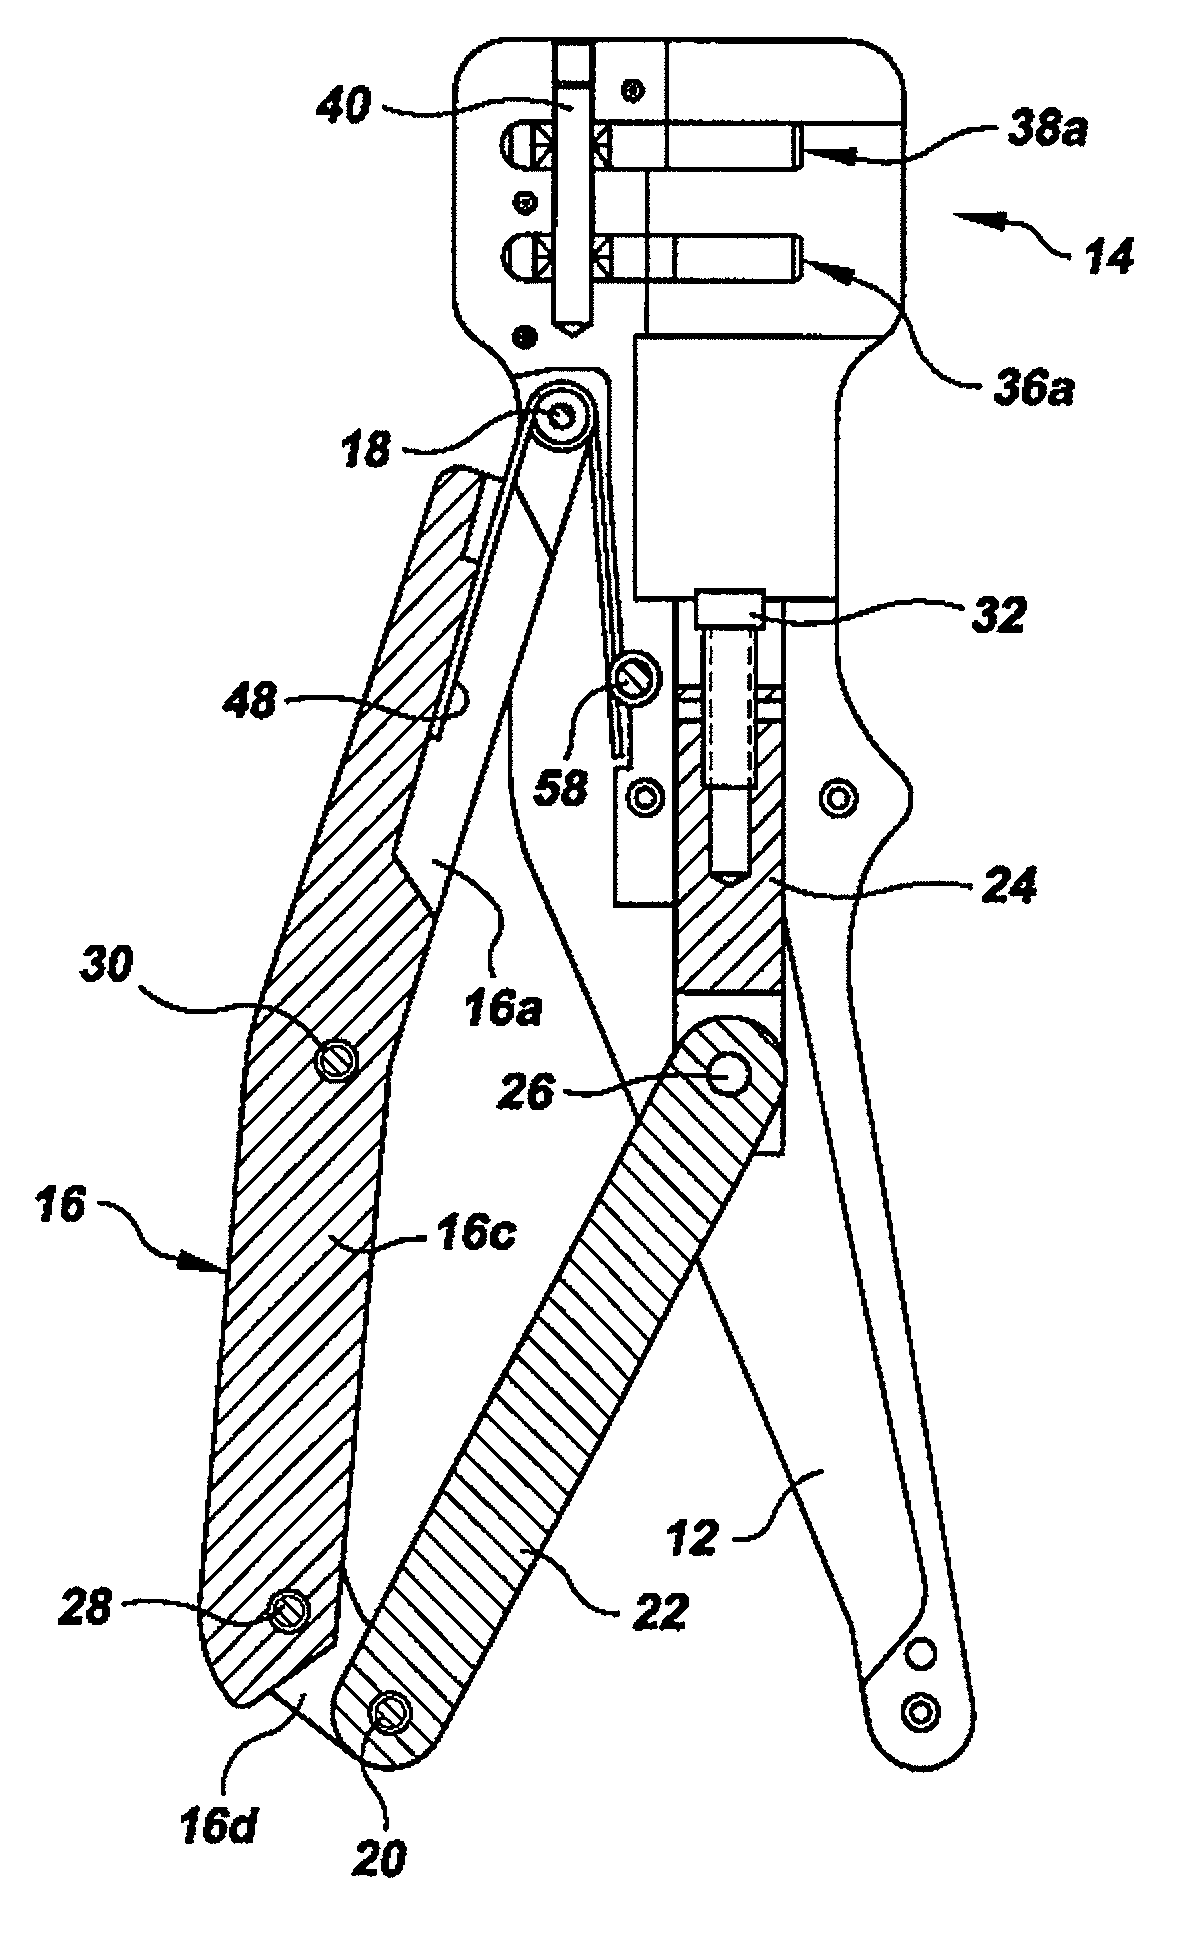 Scissor action compression assembly tool